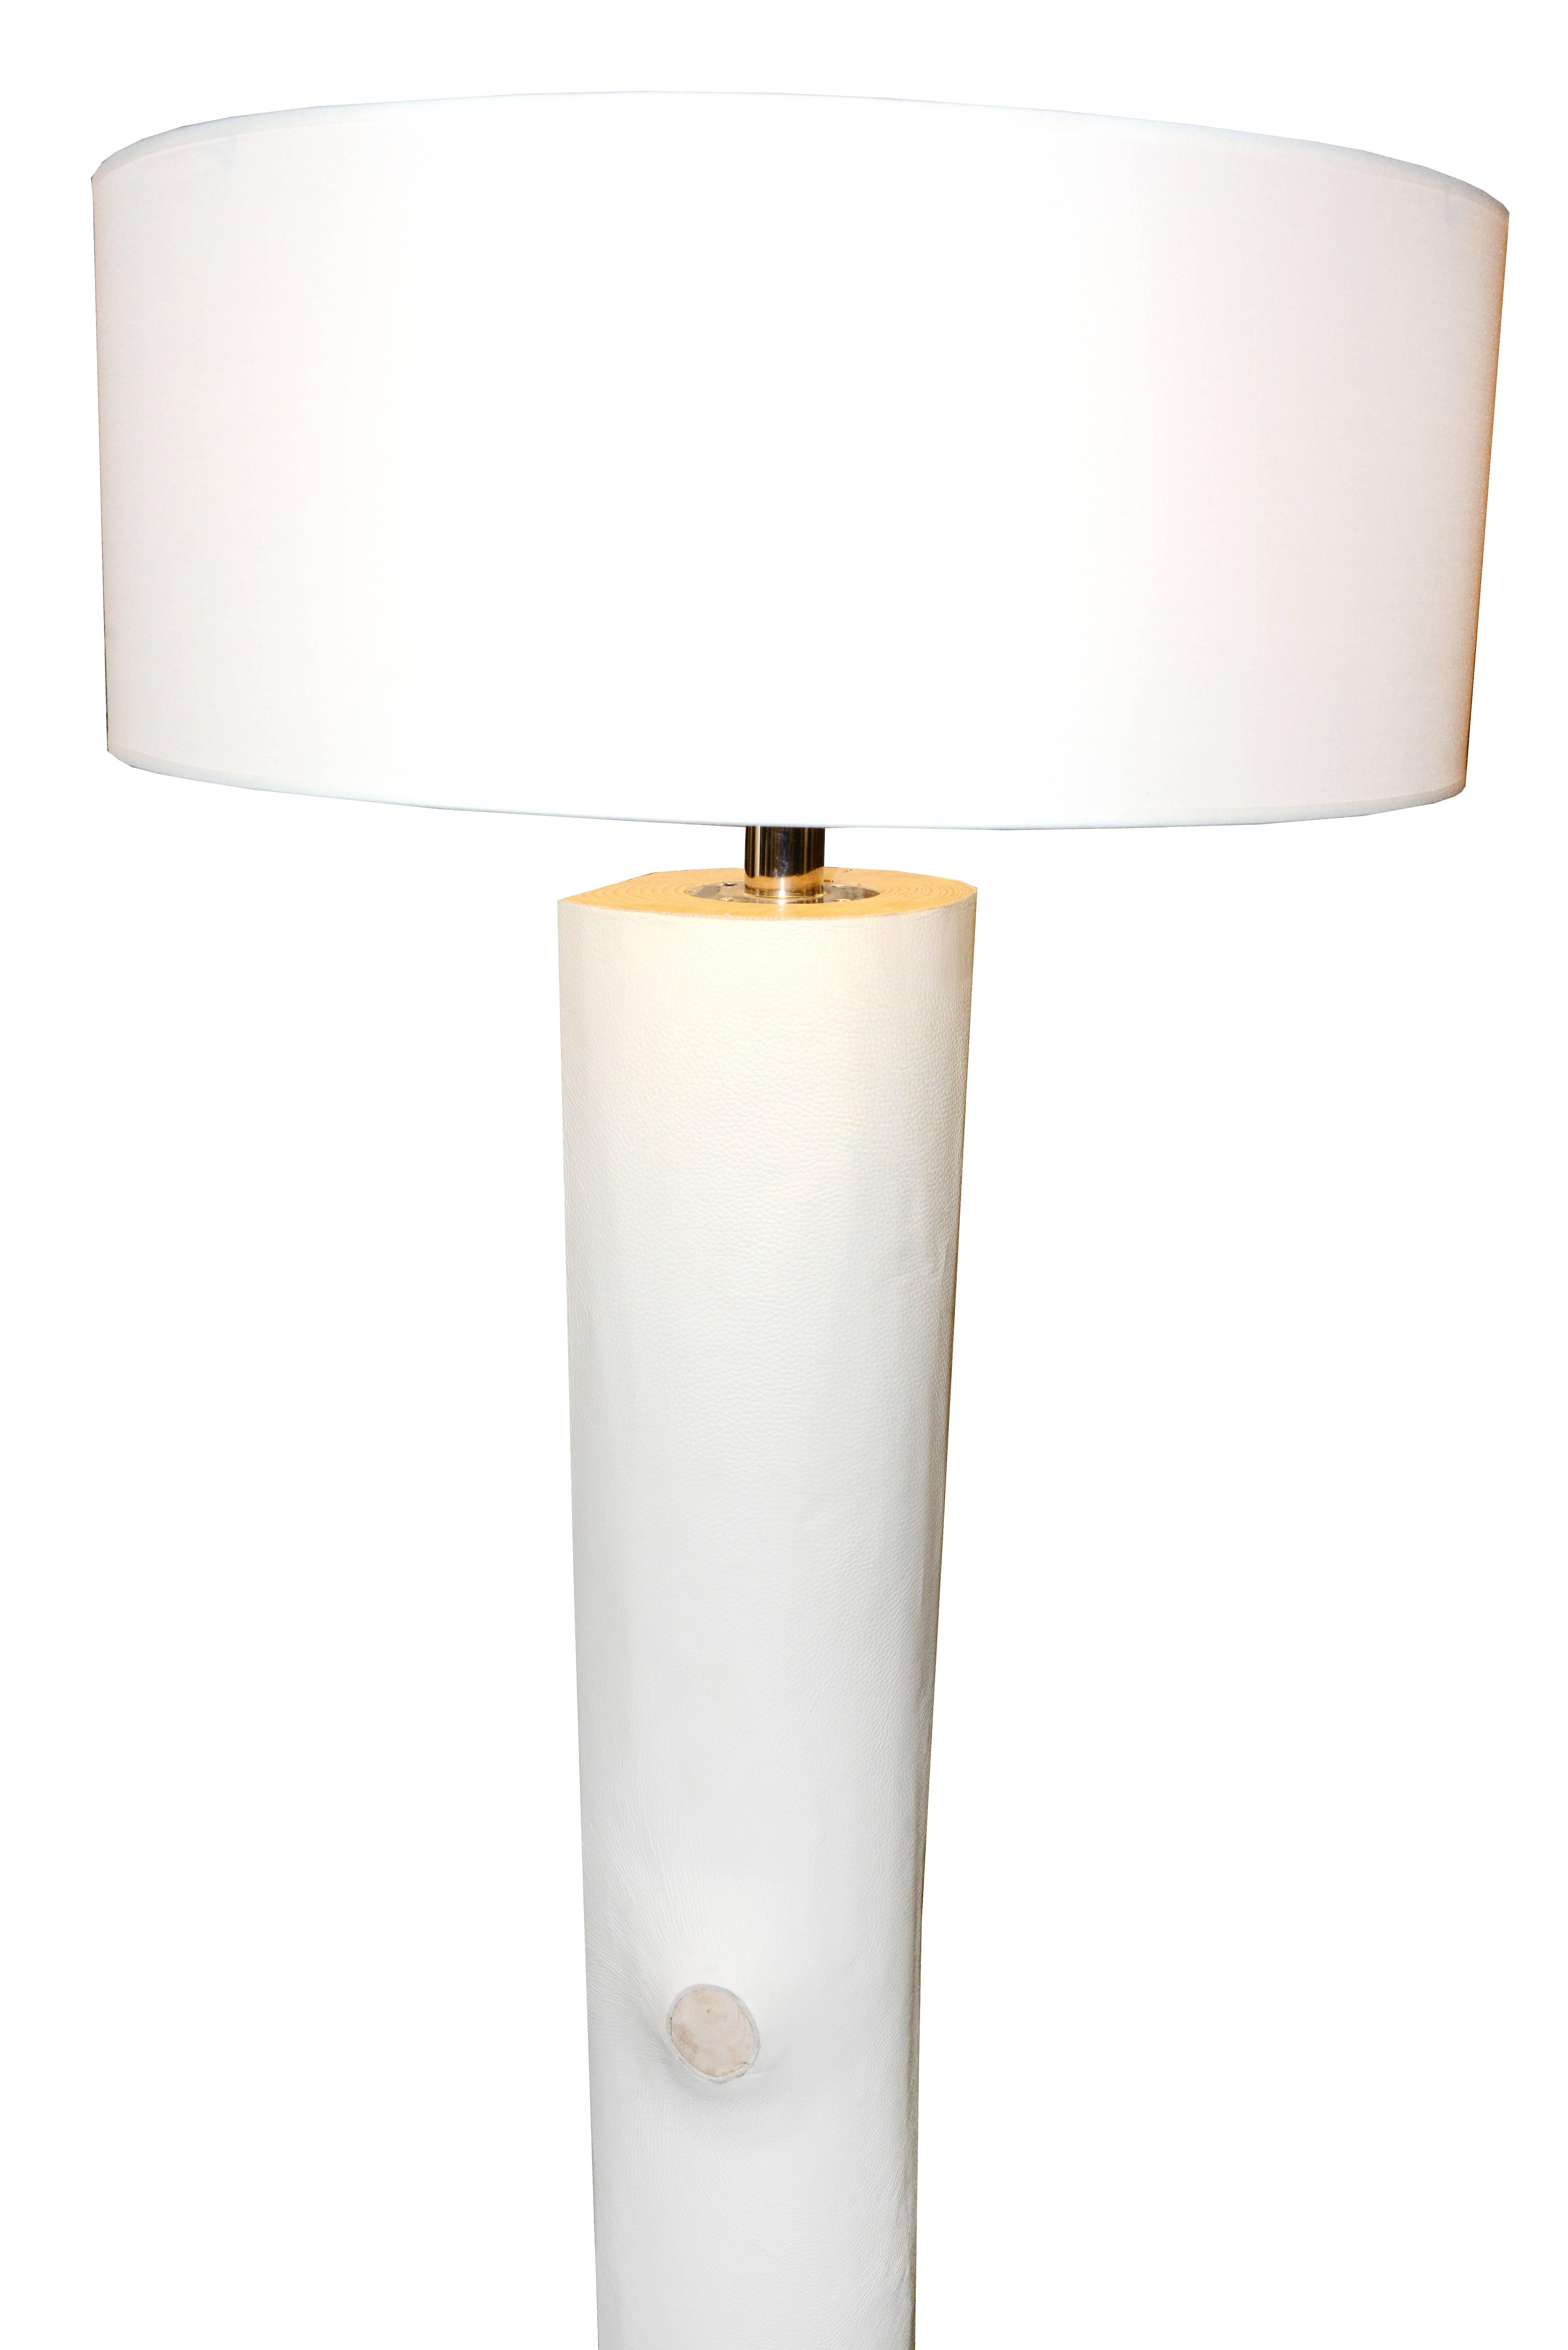 Floor lamp with softwood trunk covered
with white genuine leather. White lampshade.
